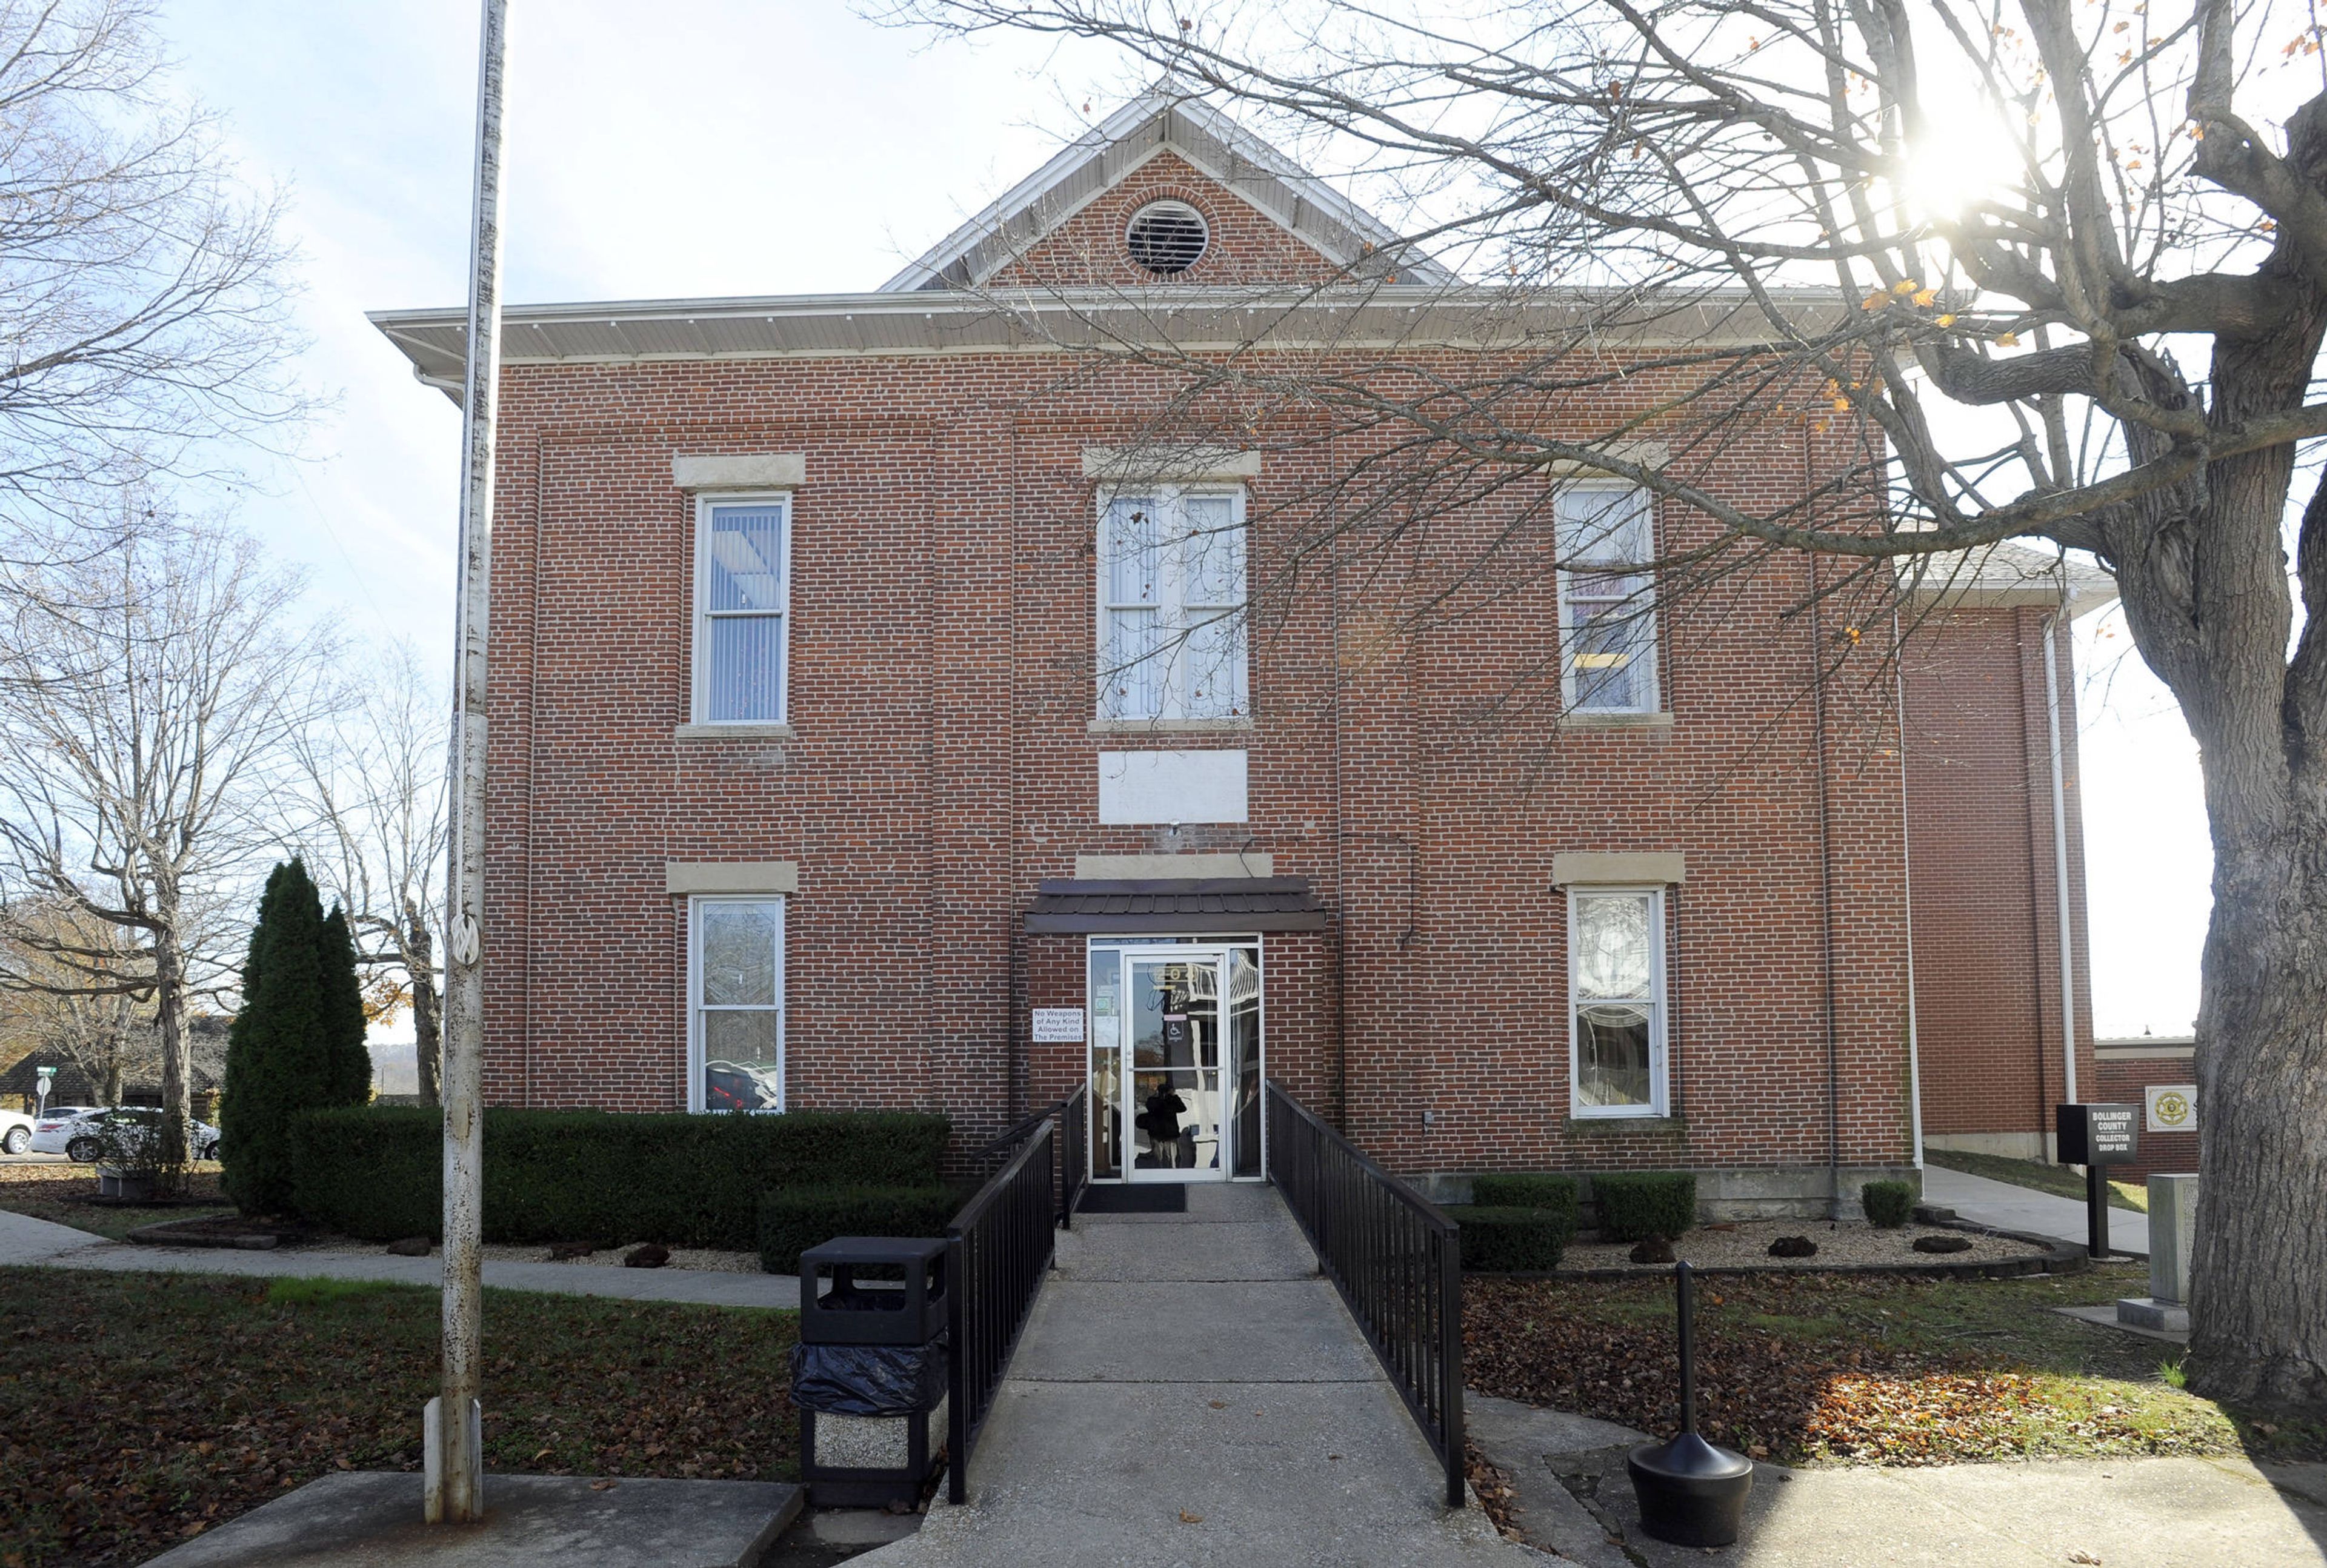 Bollinger County officials are seeking quotes for an assessment of structural damage to the county's historic courthouse. Since last summer, court proceedings and other county government business have been conducted at other locations.